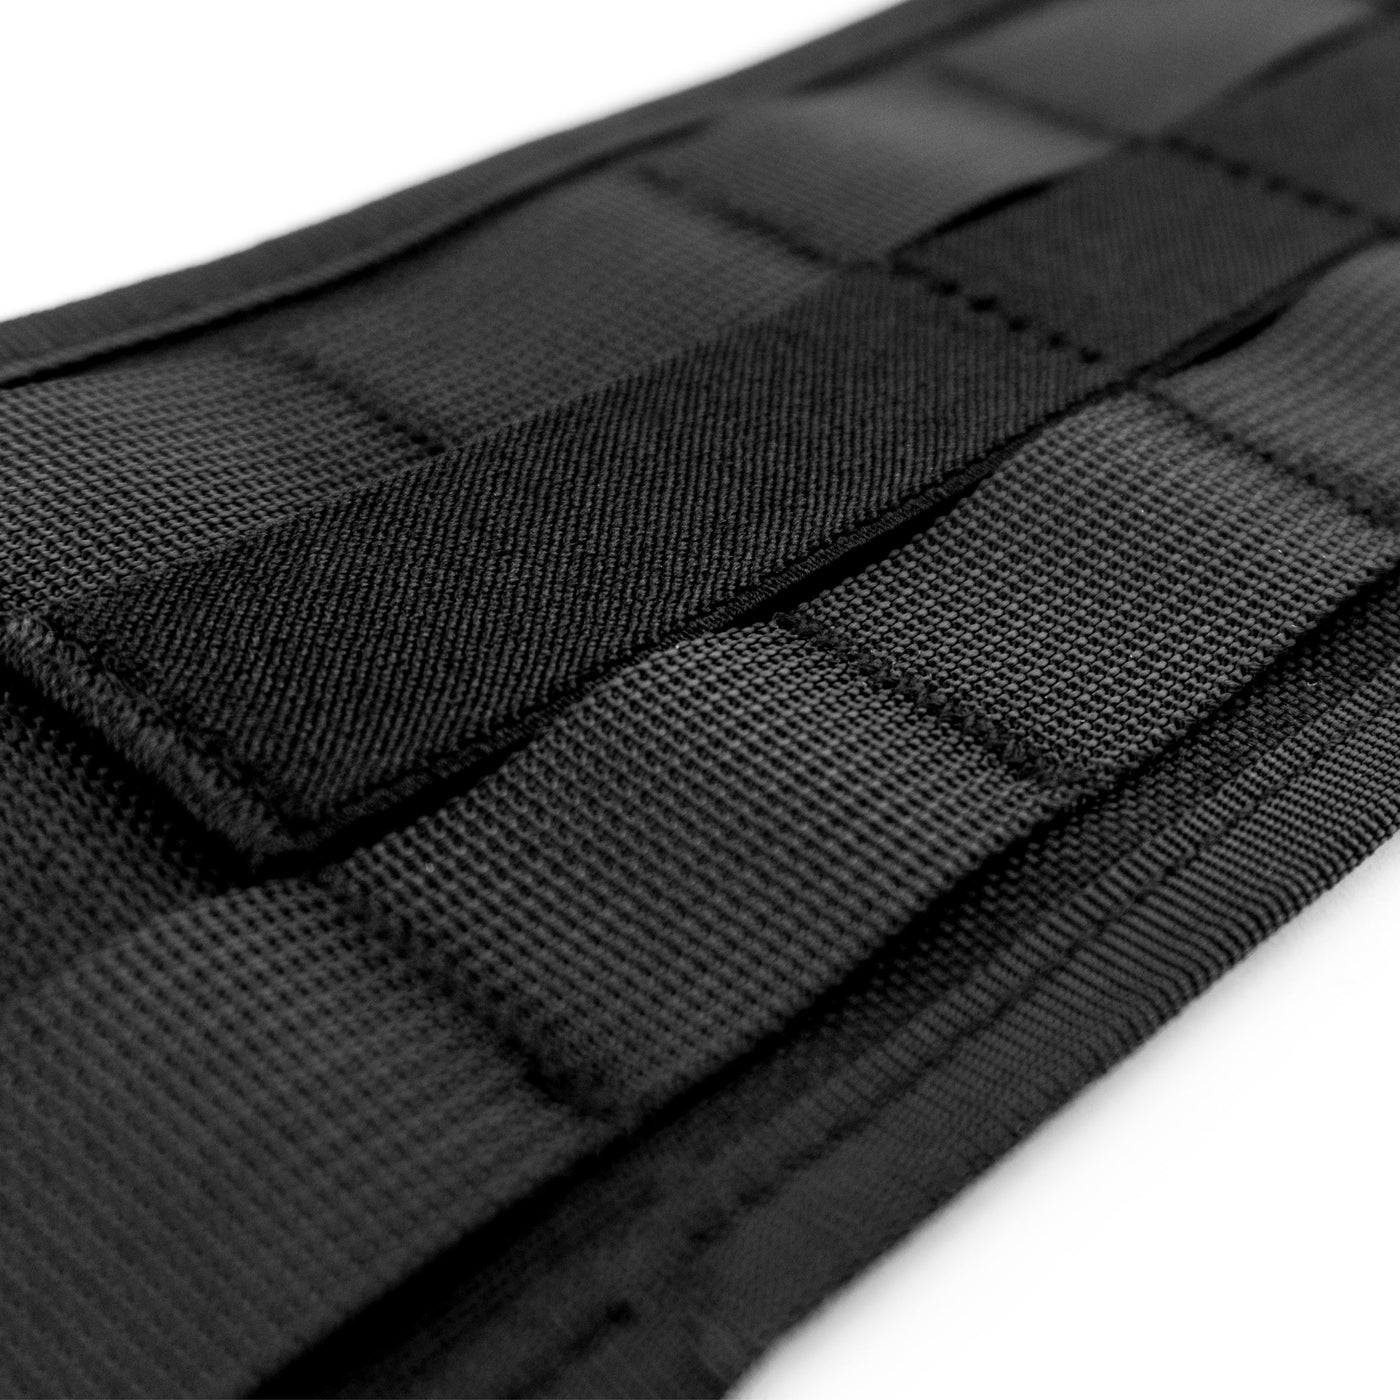 Velcro Tech Panel - Black  Large (8 x 15.5) - BuiltRight Industries